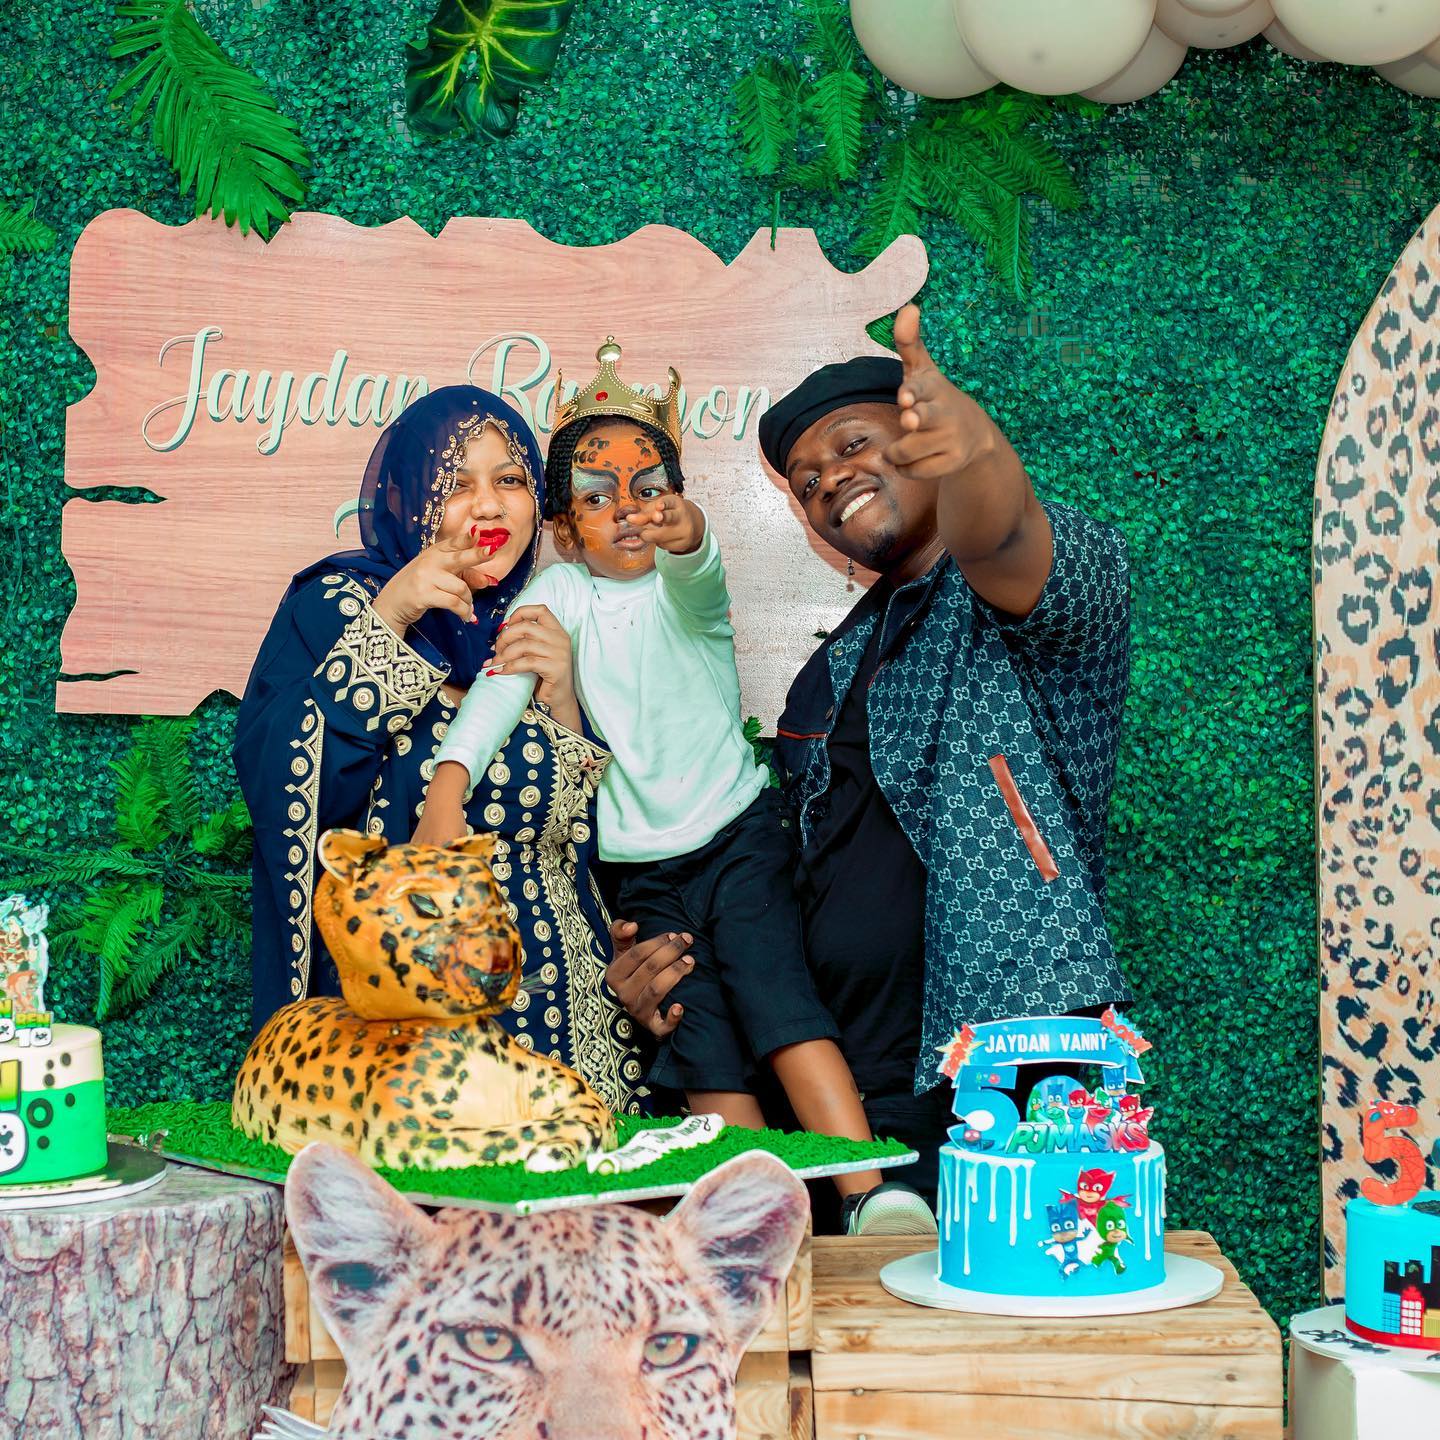 Fahyma and Rayvanny with their son Jaydan during his birthday 